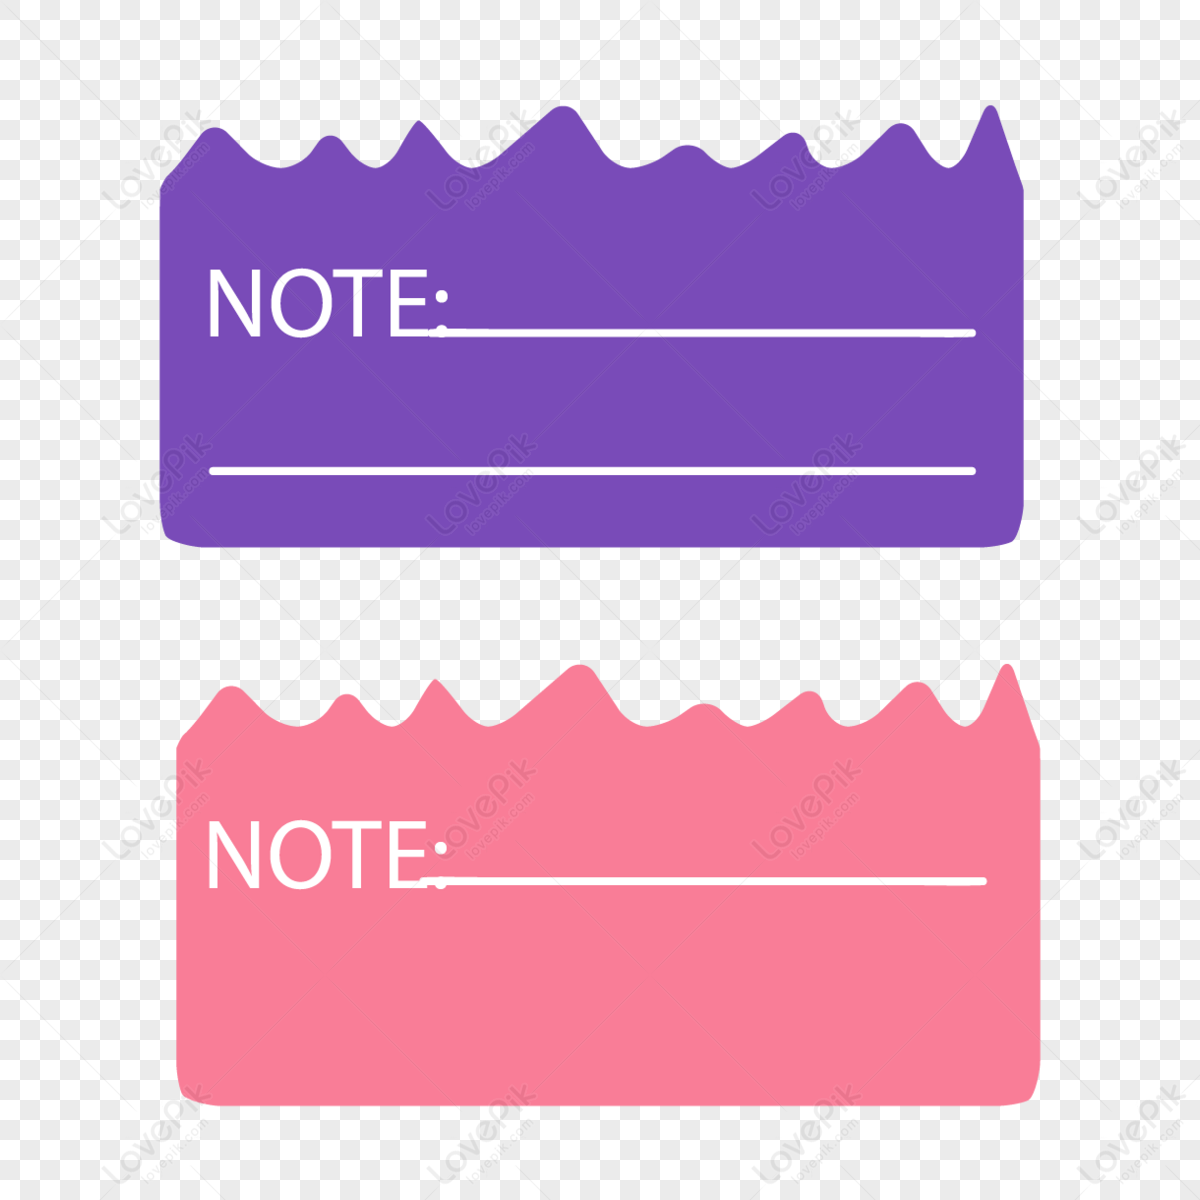 Cartoon pink purple wave edge notepad,essay,record notes png transparent image